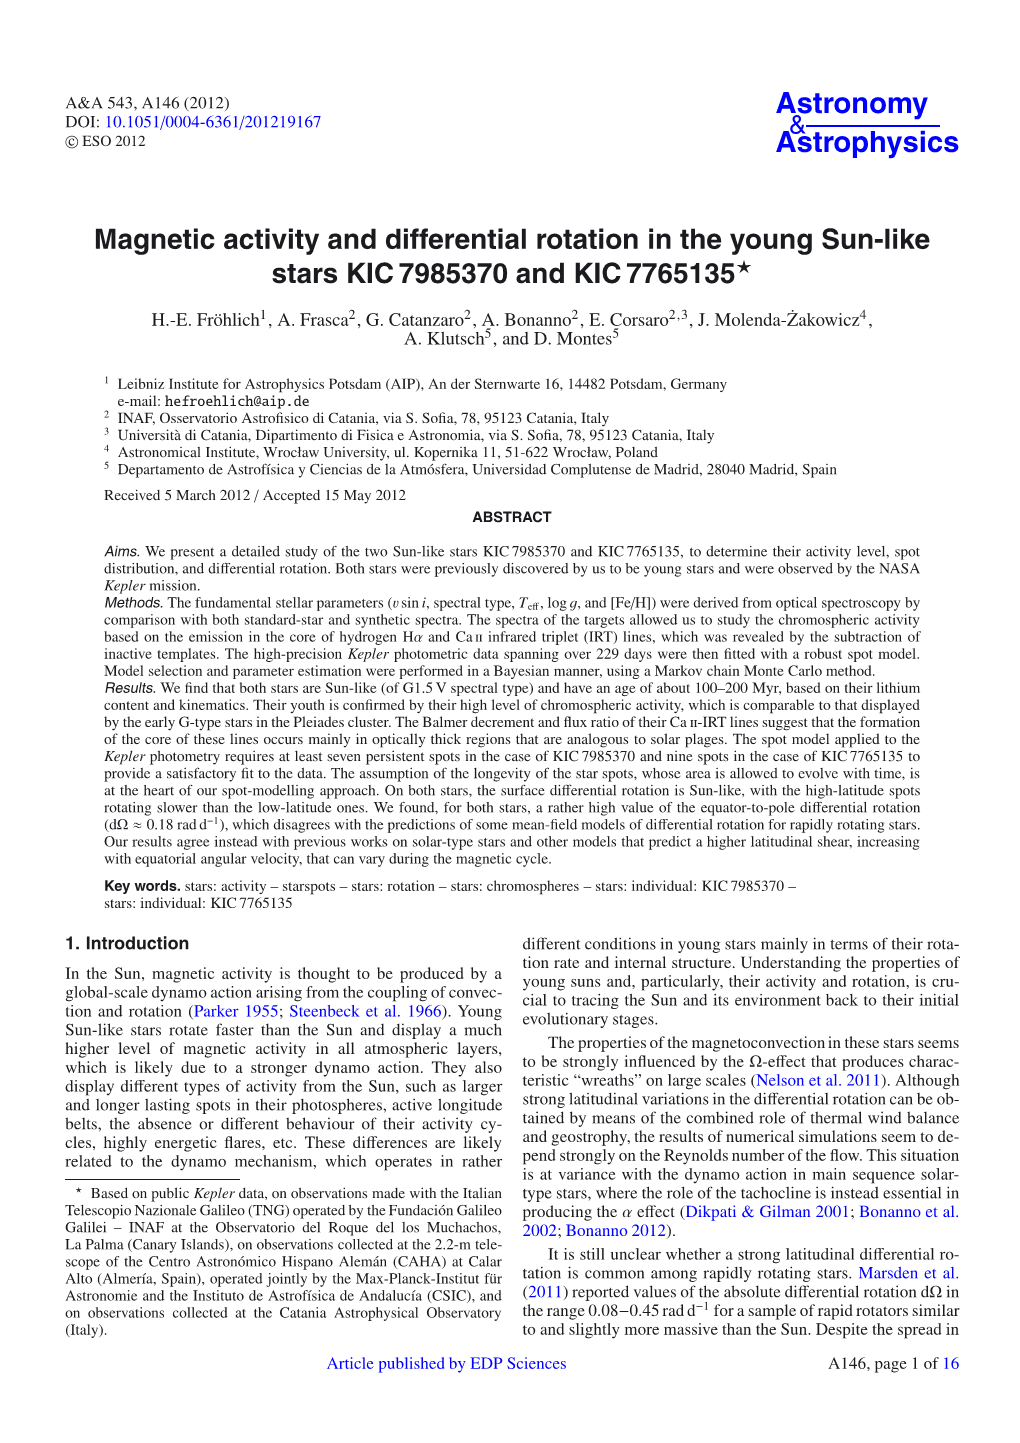 Magnetic Activity and Differential Rotation in the Young Sun-Like Stars KIC 7985370 and KIC 7765135